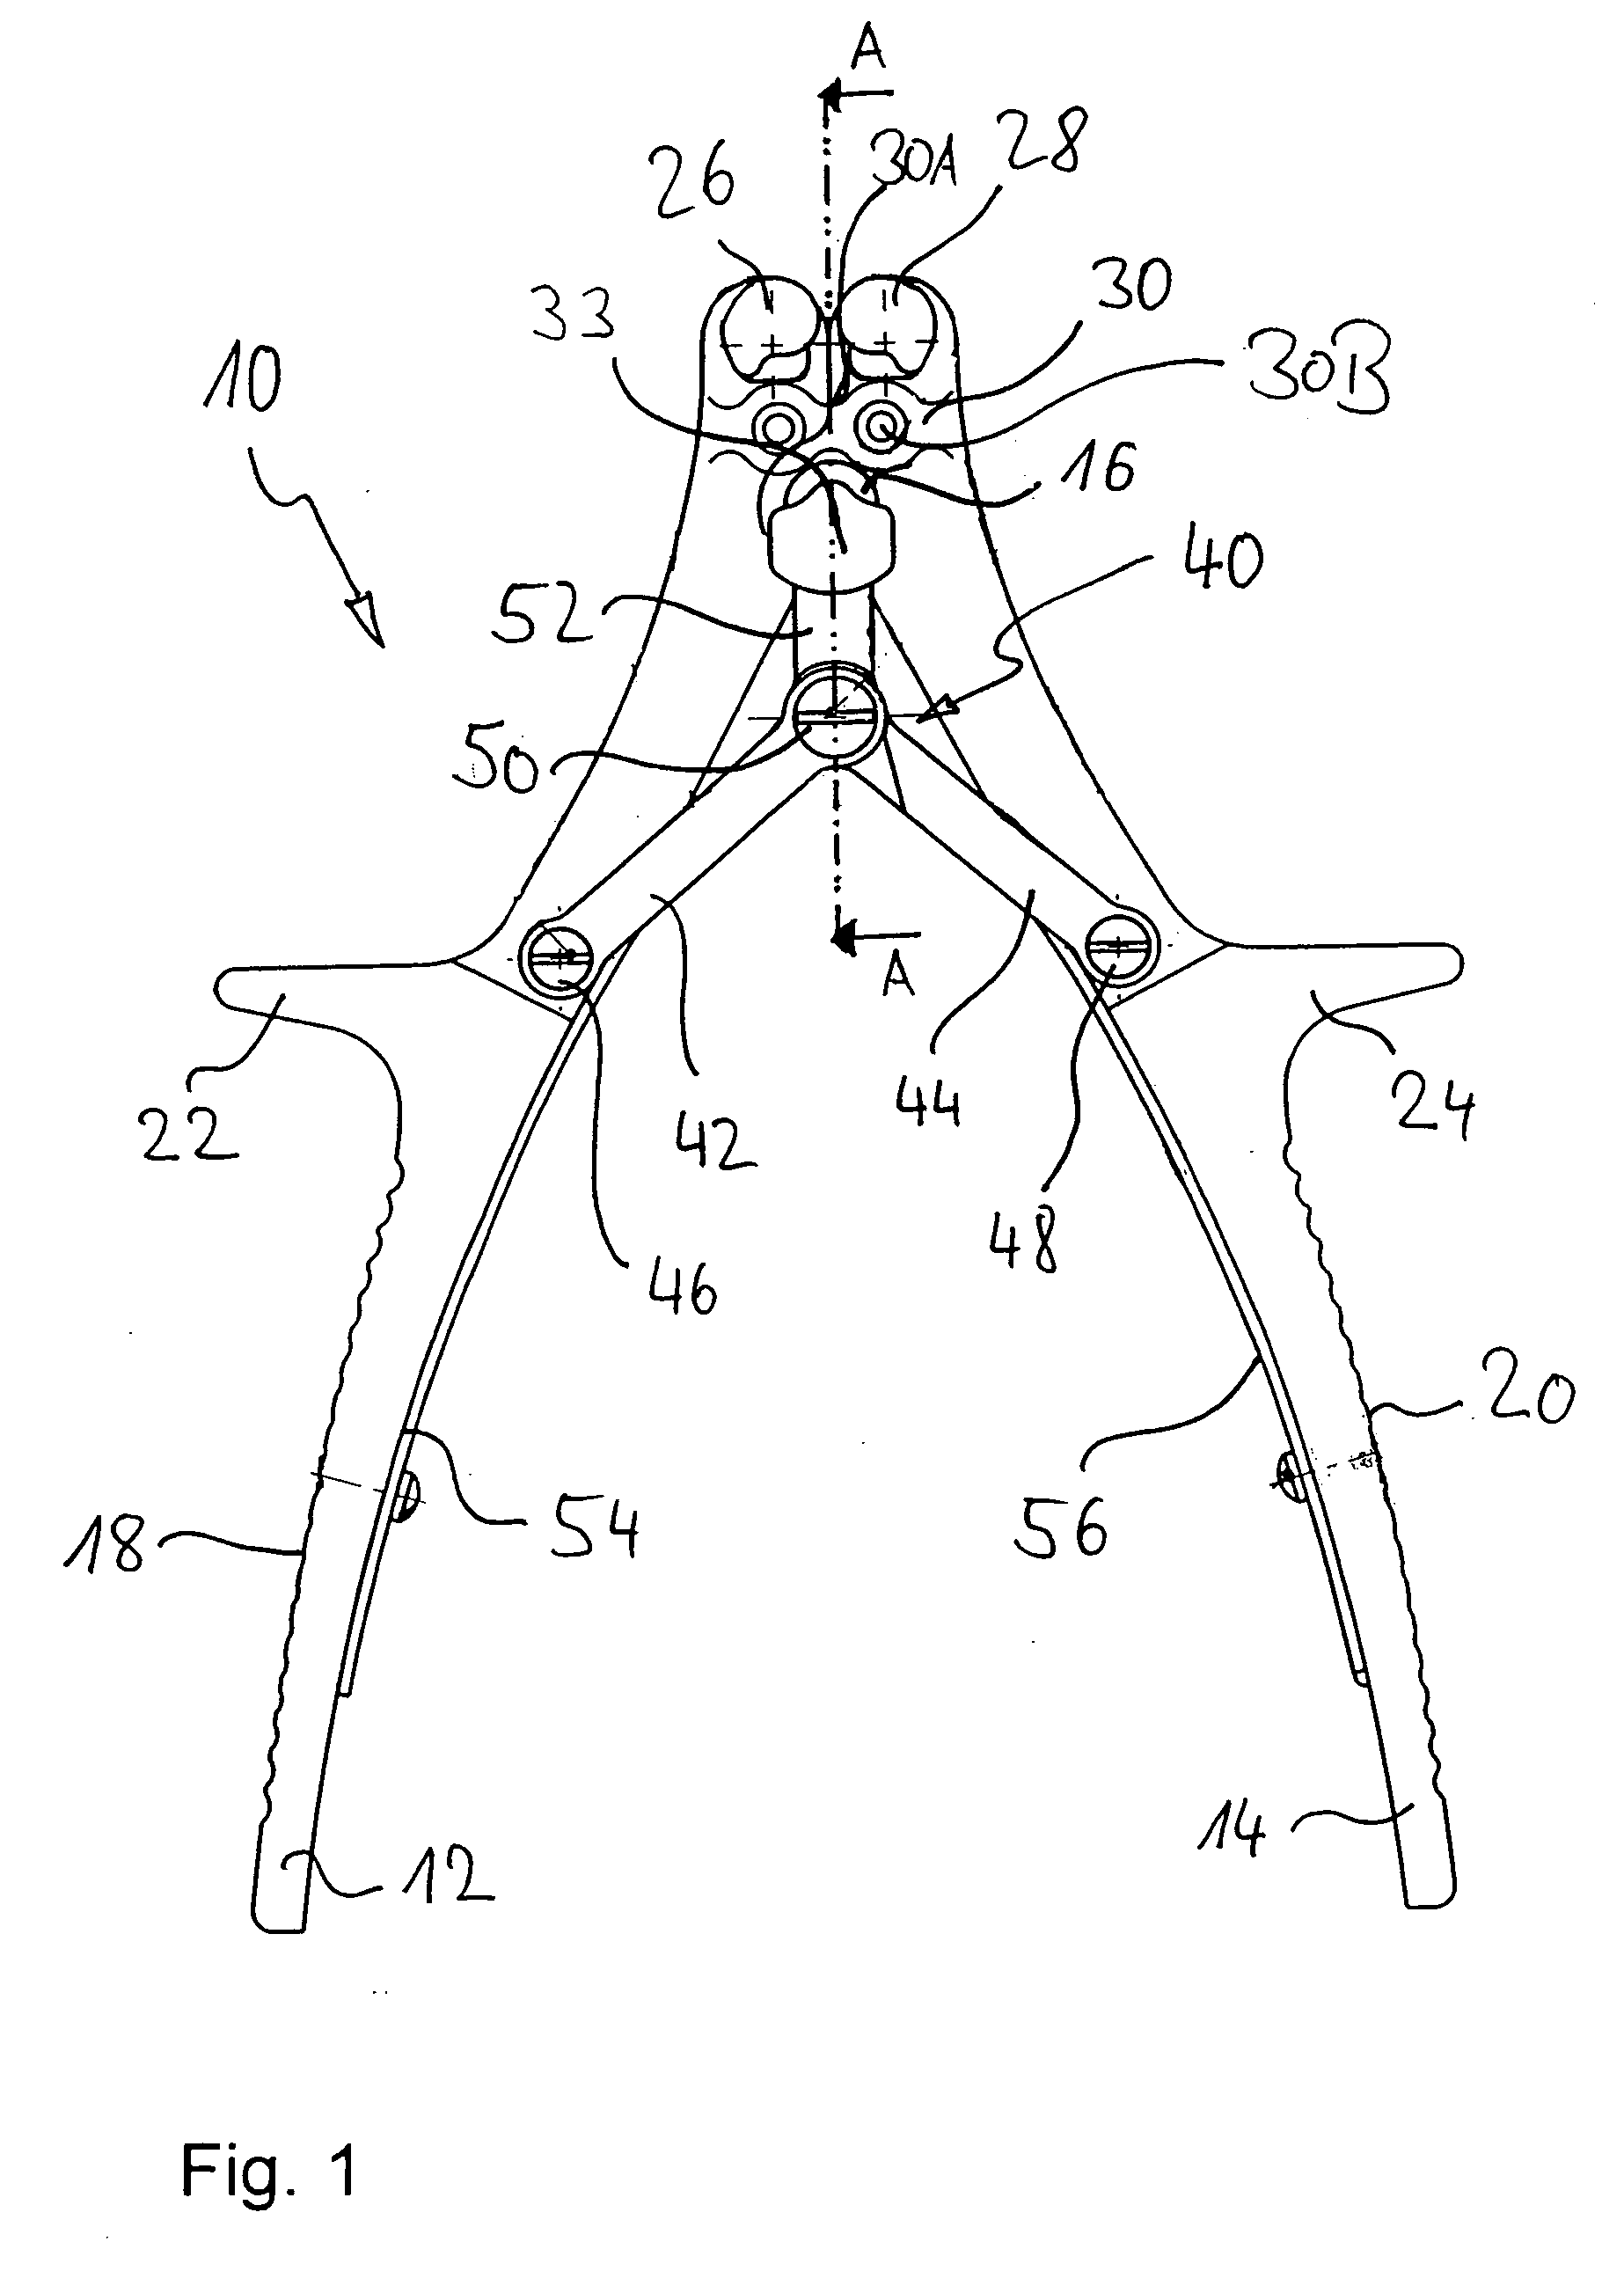 Surgical Bending Forceps and Bending Forceps System